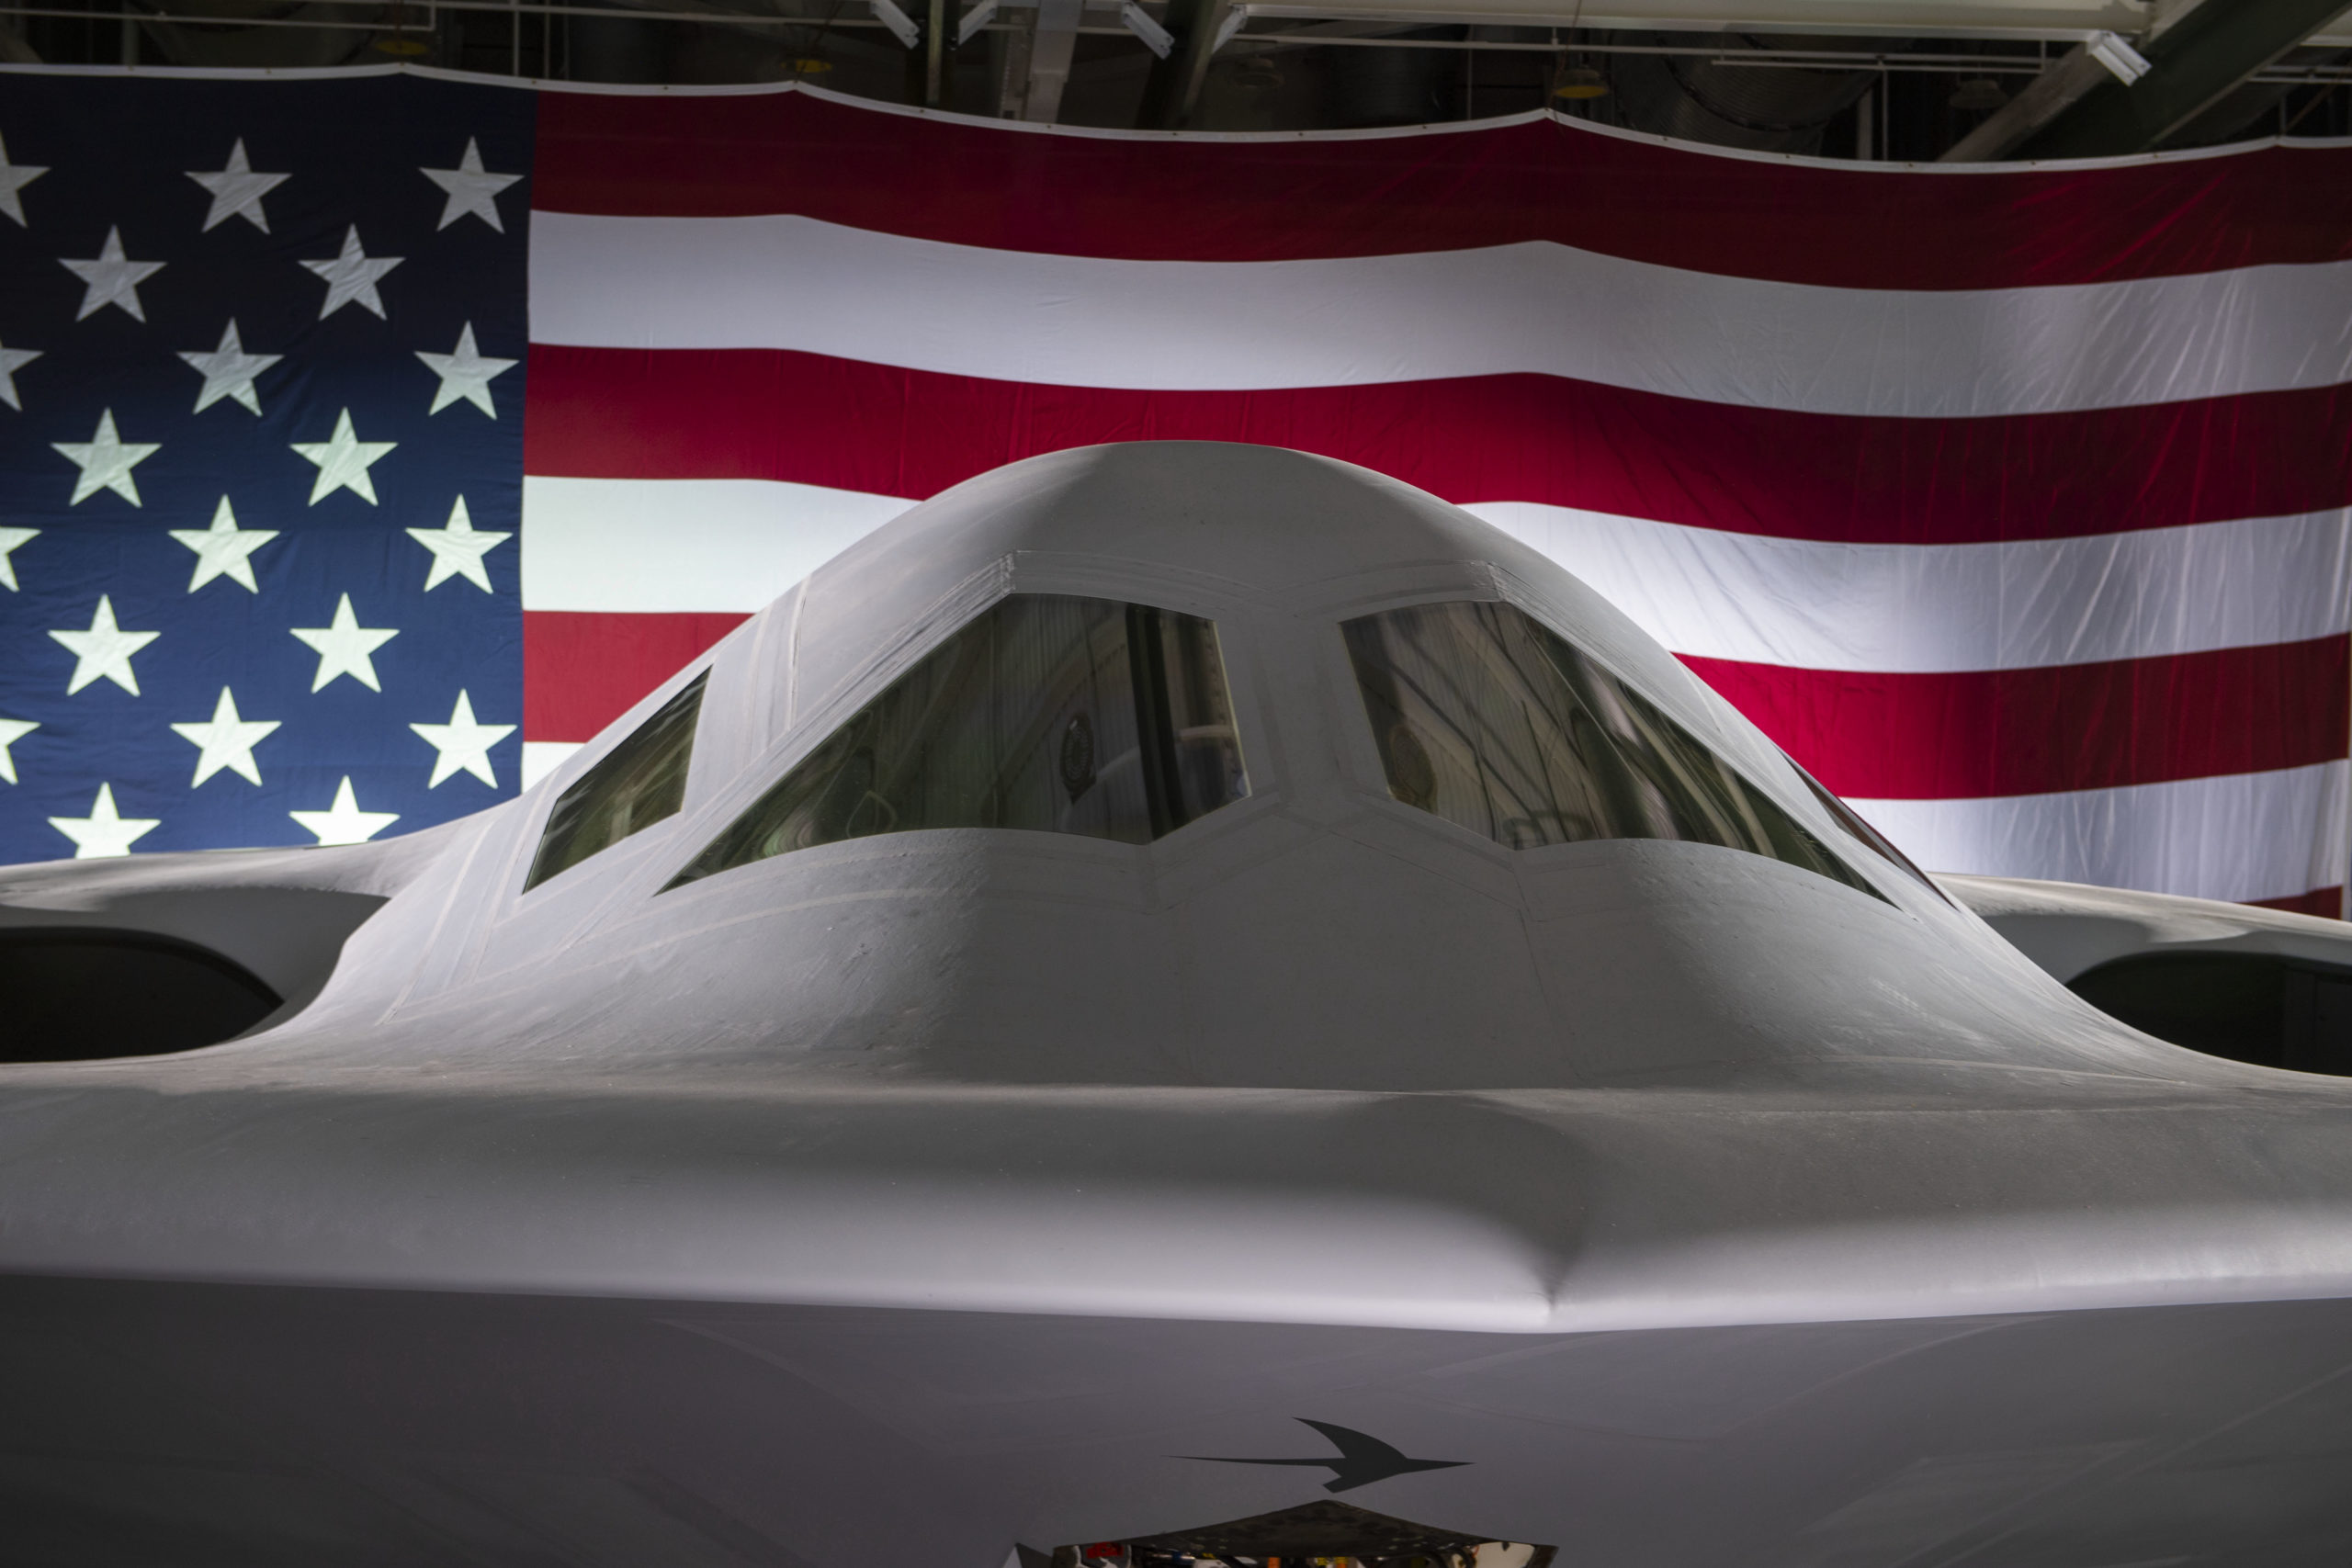 New Image of B-21 Bomber Tail Shows Different Exhausts and Rear Deck from B-2